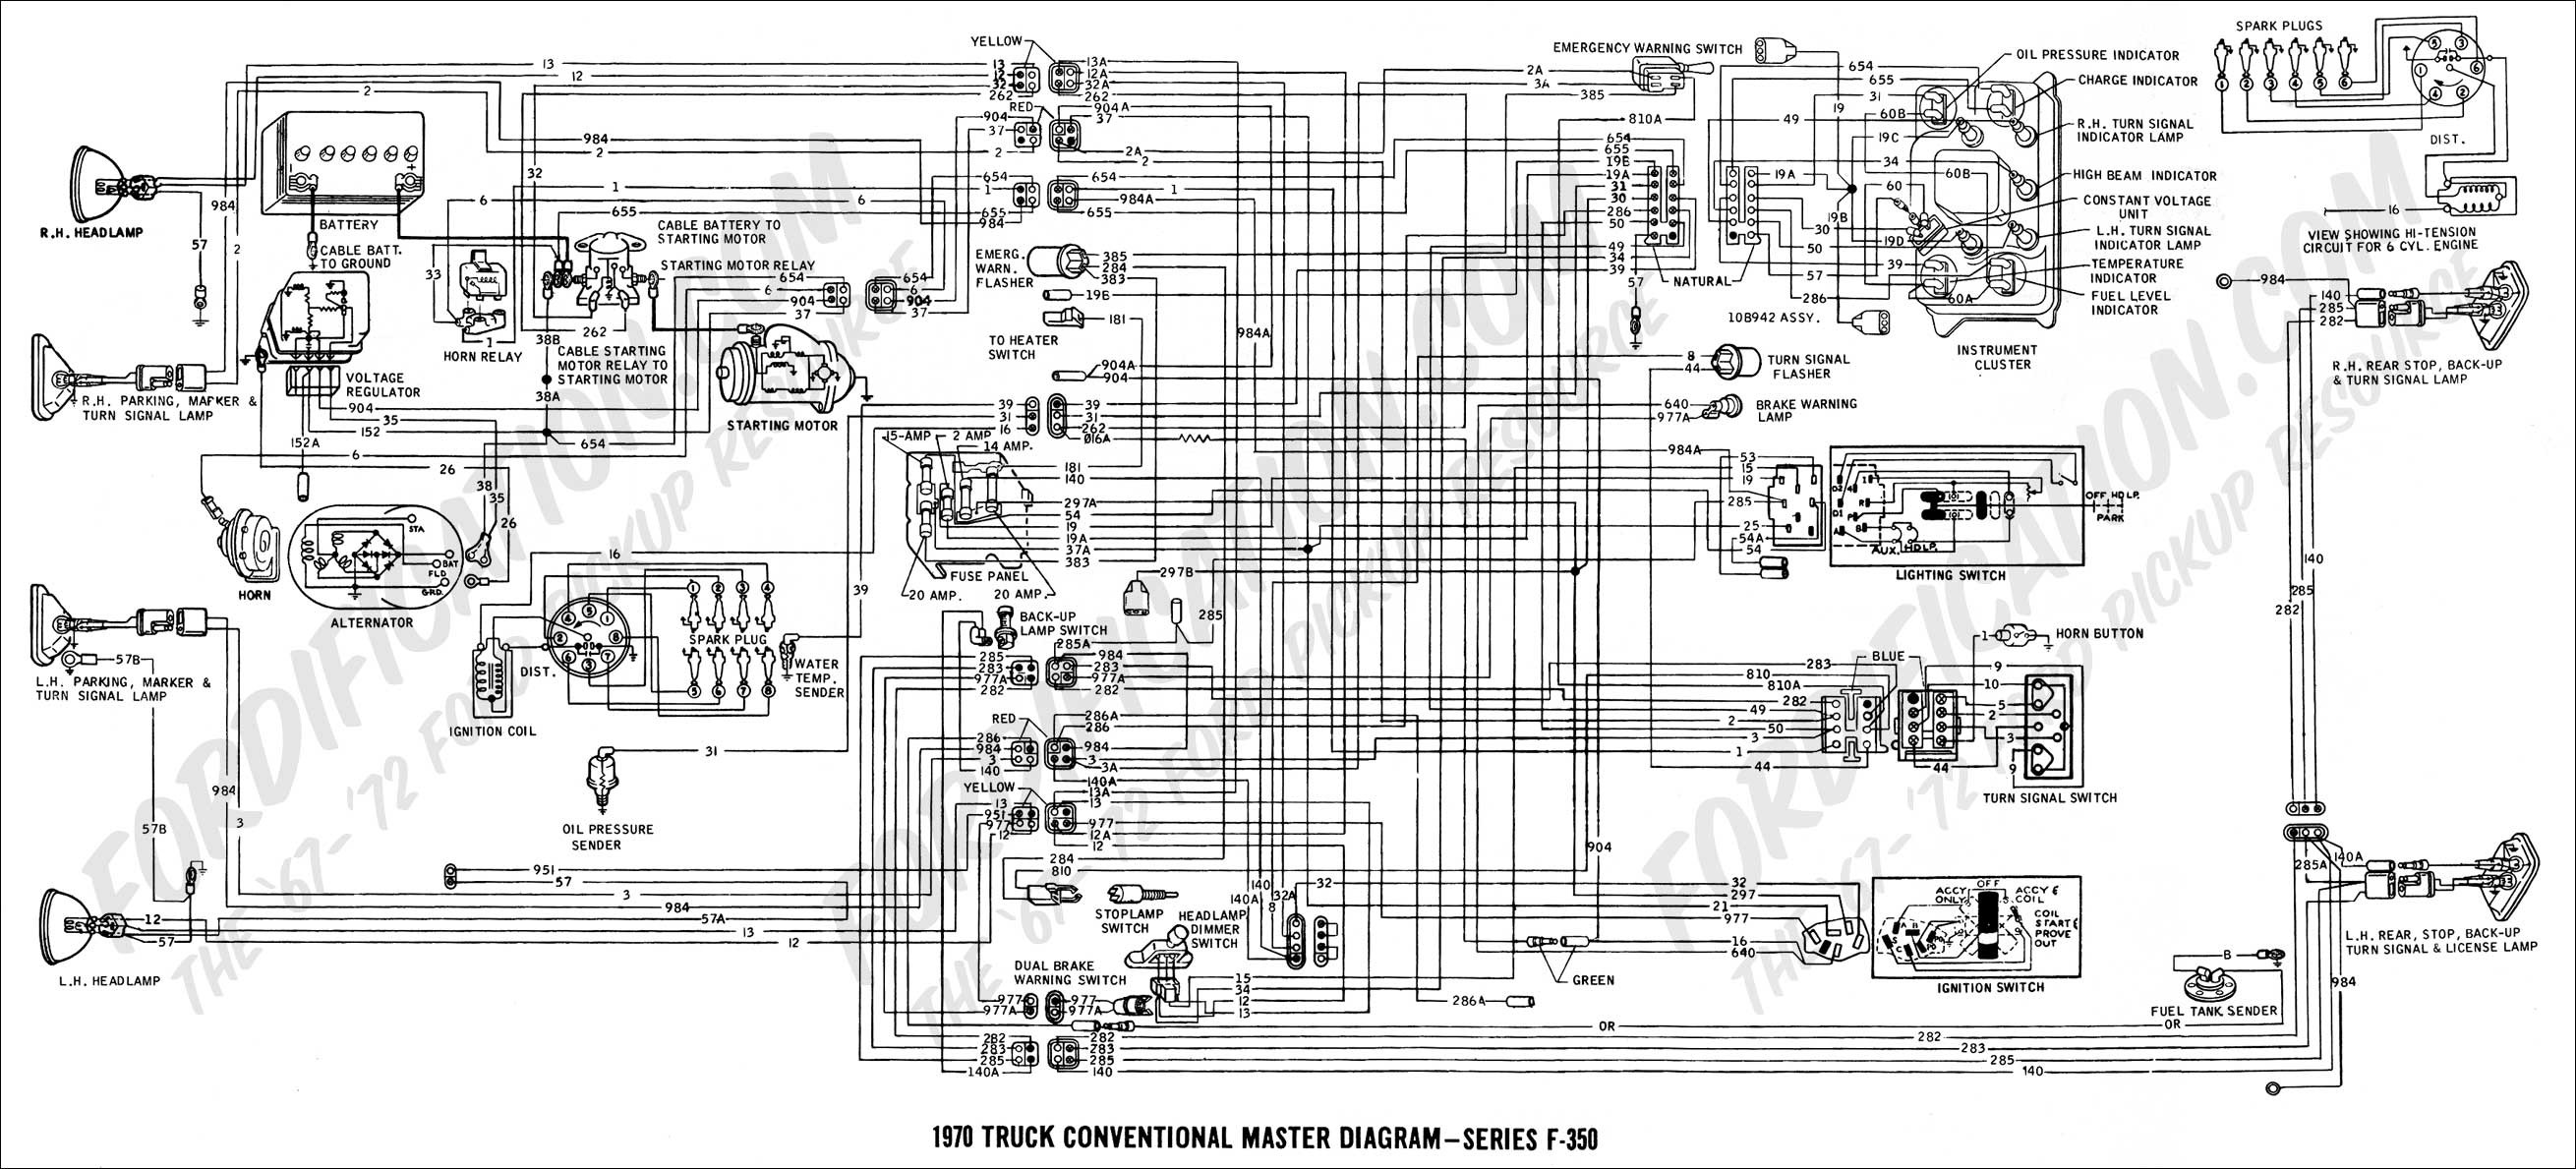 Truck Air System Diagram Diagram as Well ford F 350 Wiring Diagram In Addition ford Headlight Of Truck Air System Diagram